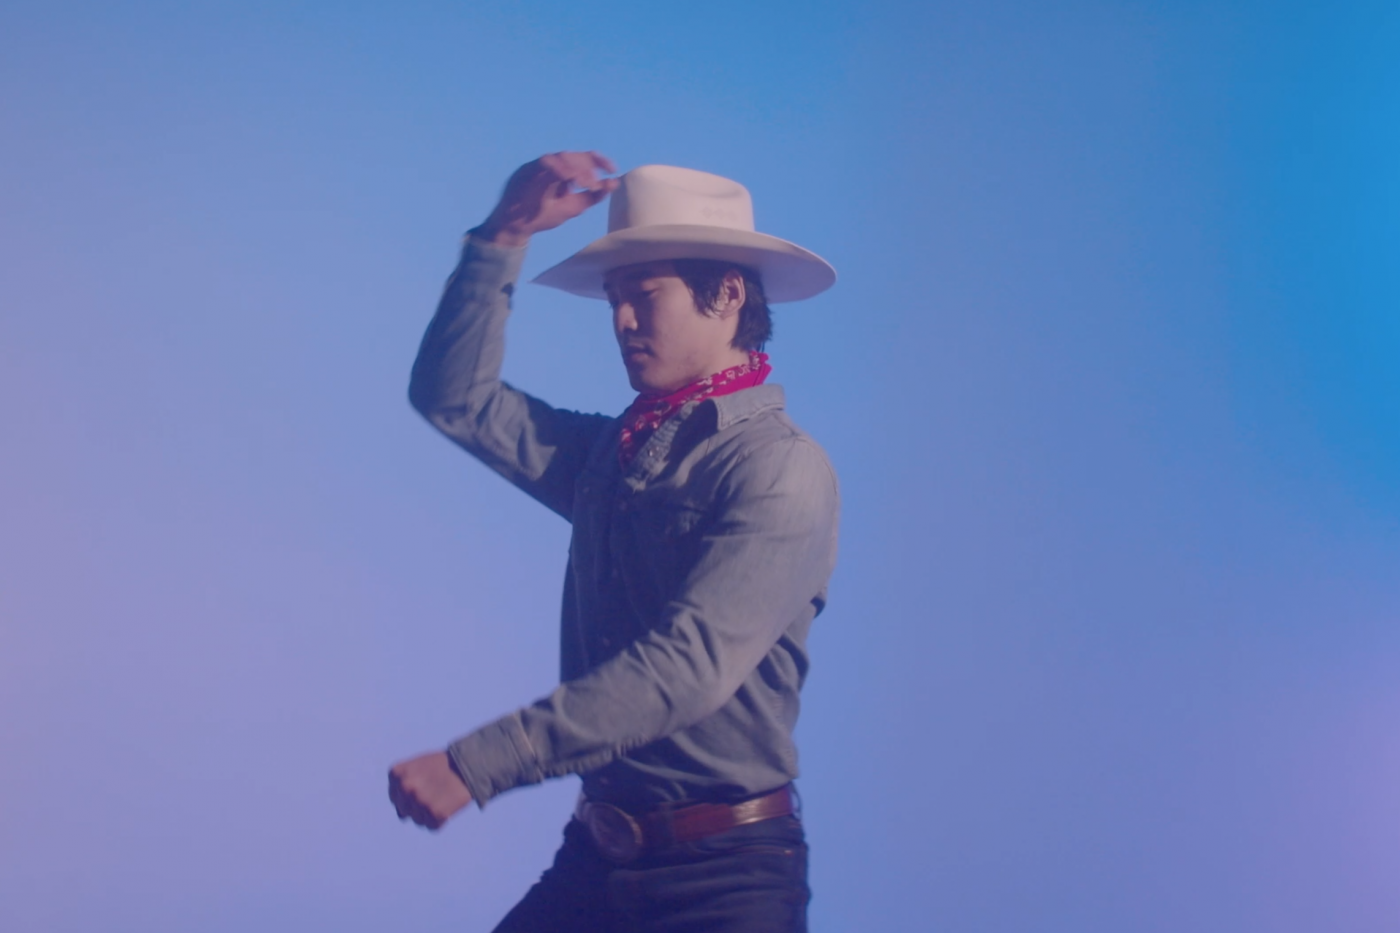 An Asian man dressed in blue jeans, a jean collared shirt, a brown cowboy belt, a red bandana around his neck, and a white cowboy hat poses centered against a blue background. His arms are gesturing as if he is riding a horse.